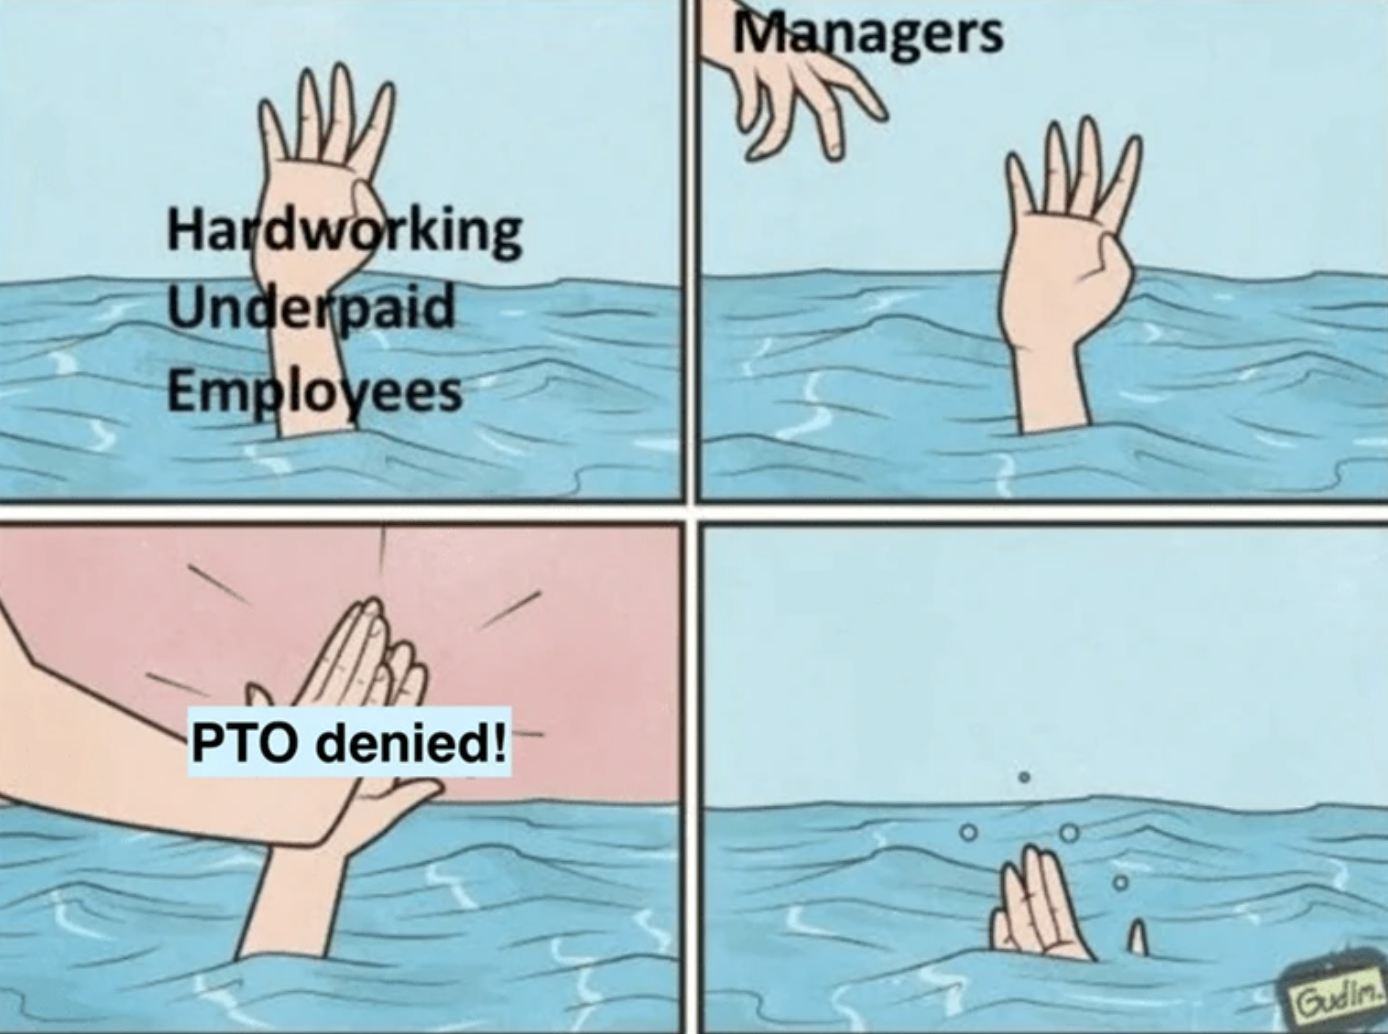 pizza party drowning meme - Hardworking Underpaid Employees Pto denied! Managers Gudin